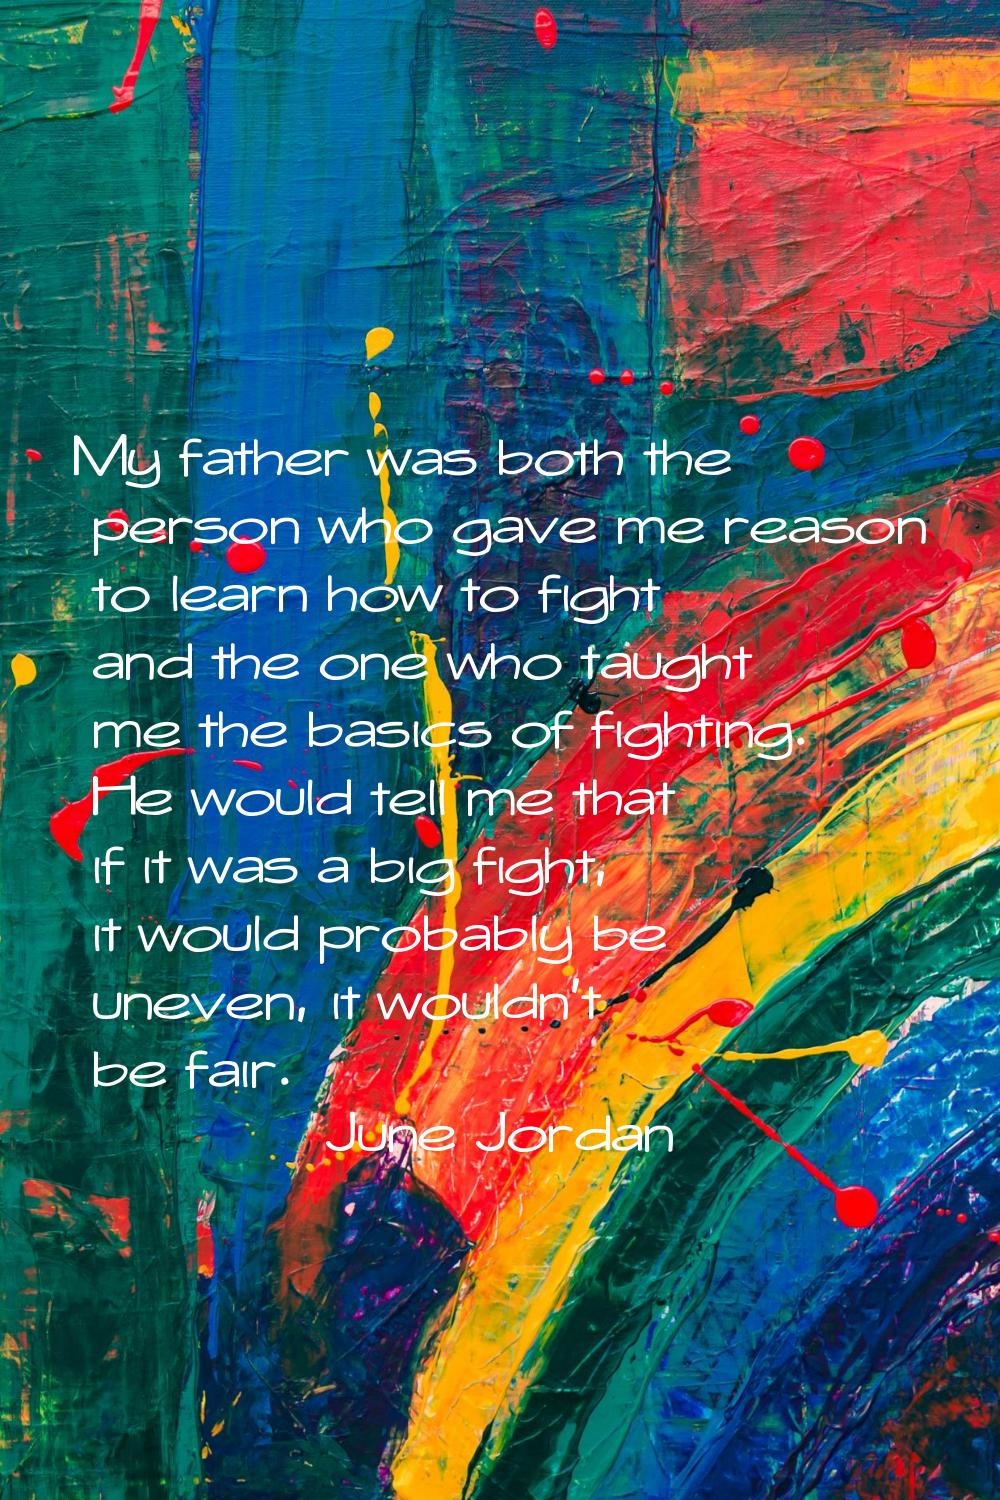 My father was both the person who gave me reason to learn how to fight and the one who taught me th